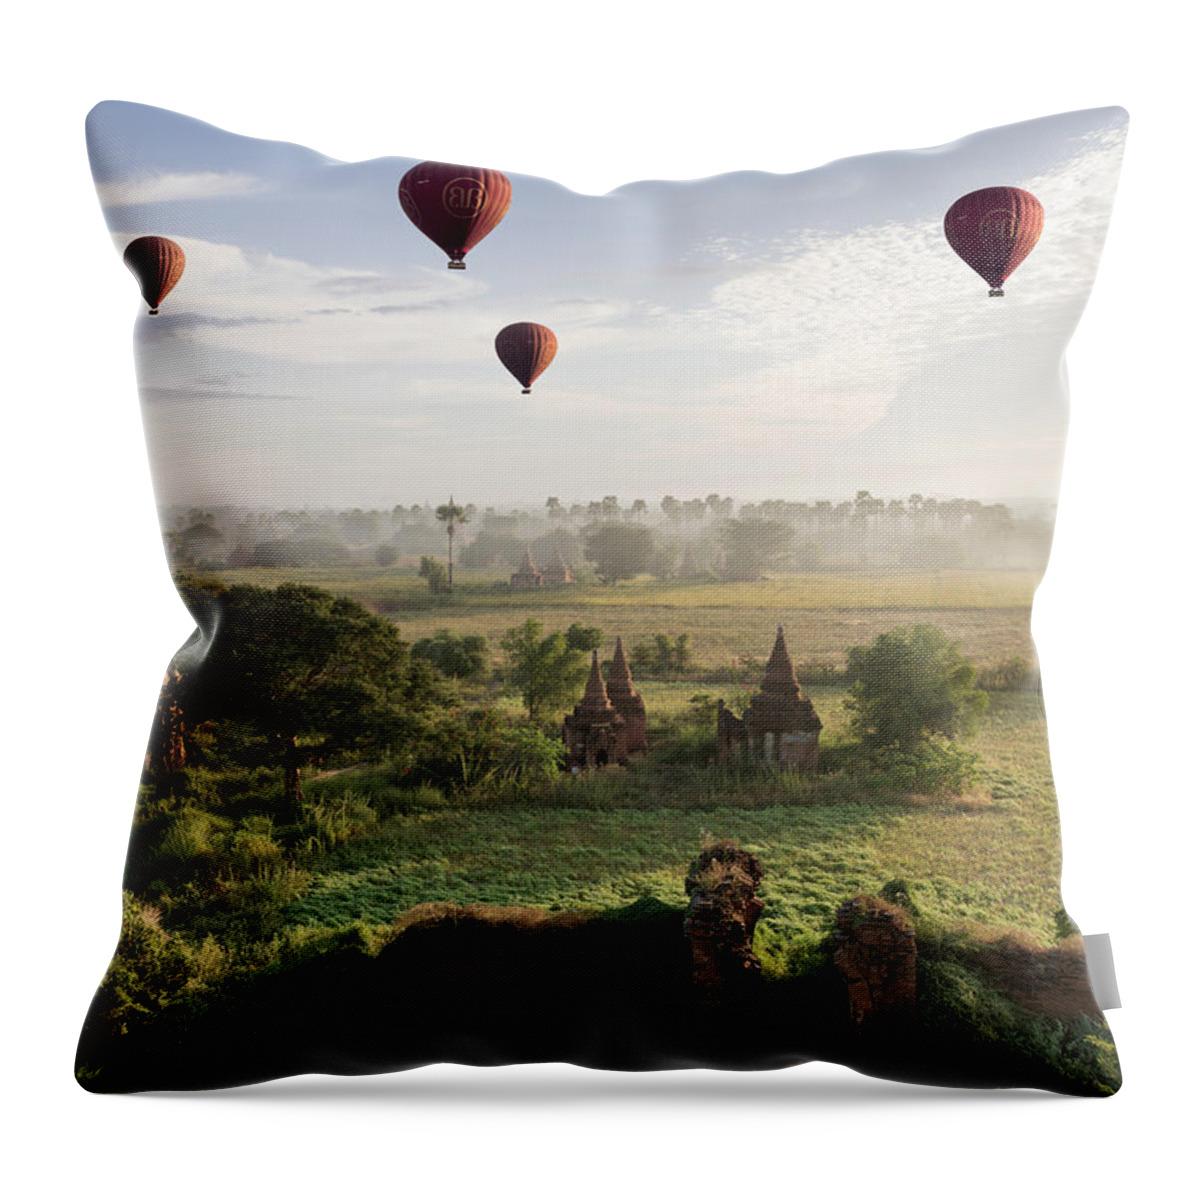 Hot Air Balloon Throw Pillow featuring the photograph Hot Air Balloons Flying Over Ancient by Martin Puddy